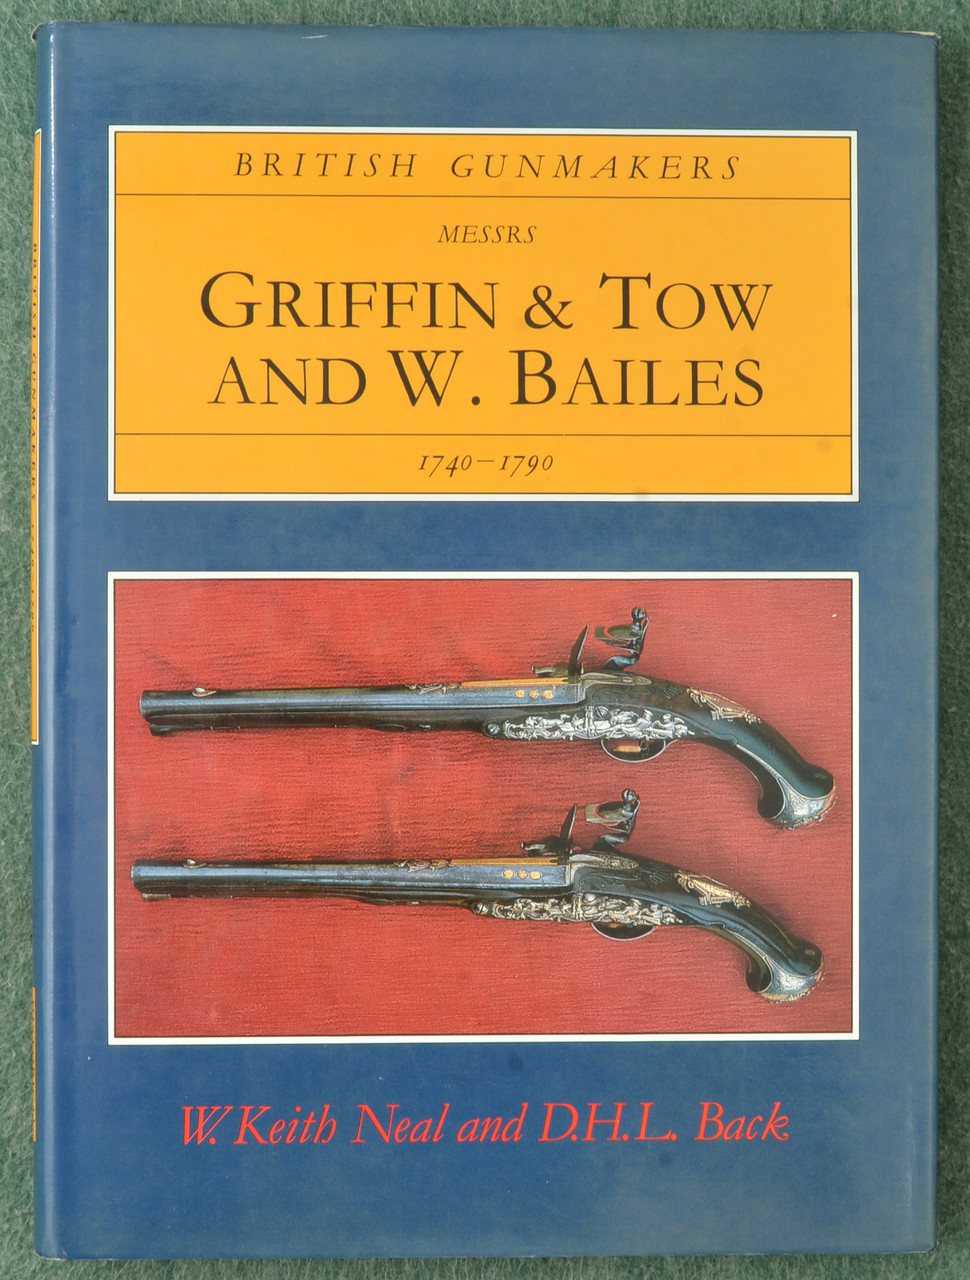 BRITISH GUNMAKERS GRIFFIN & TOW W. BAILES - C52186